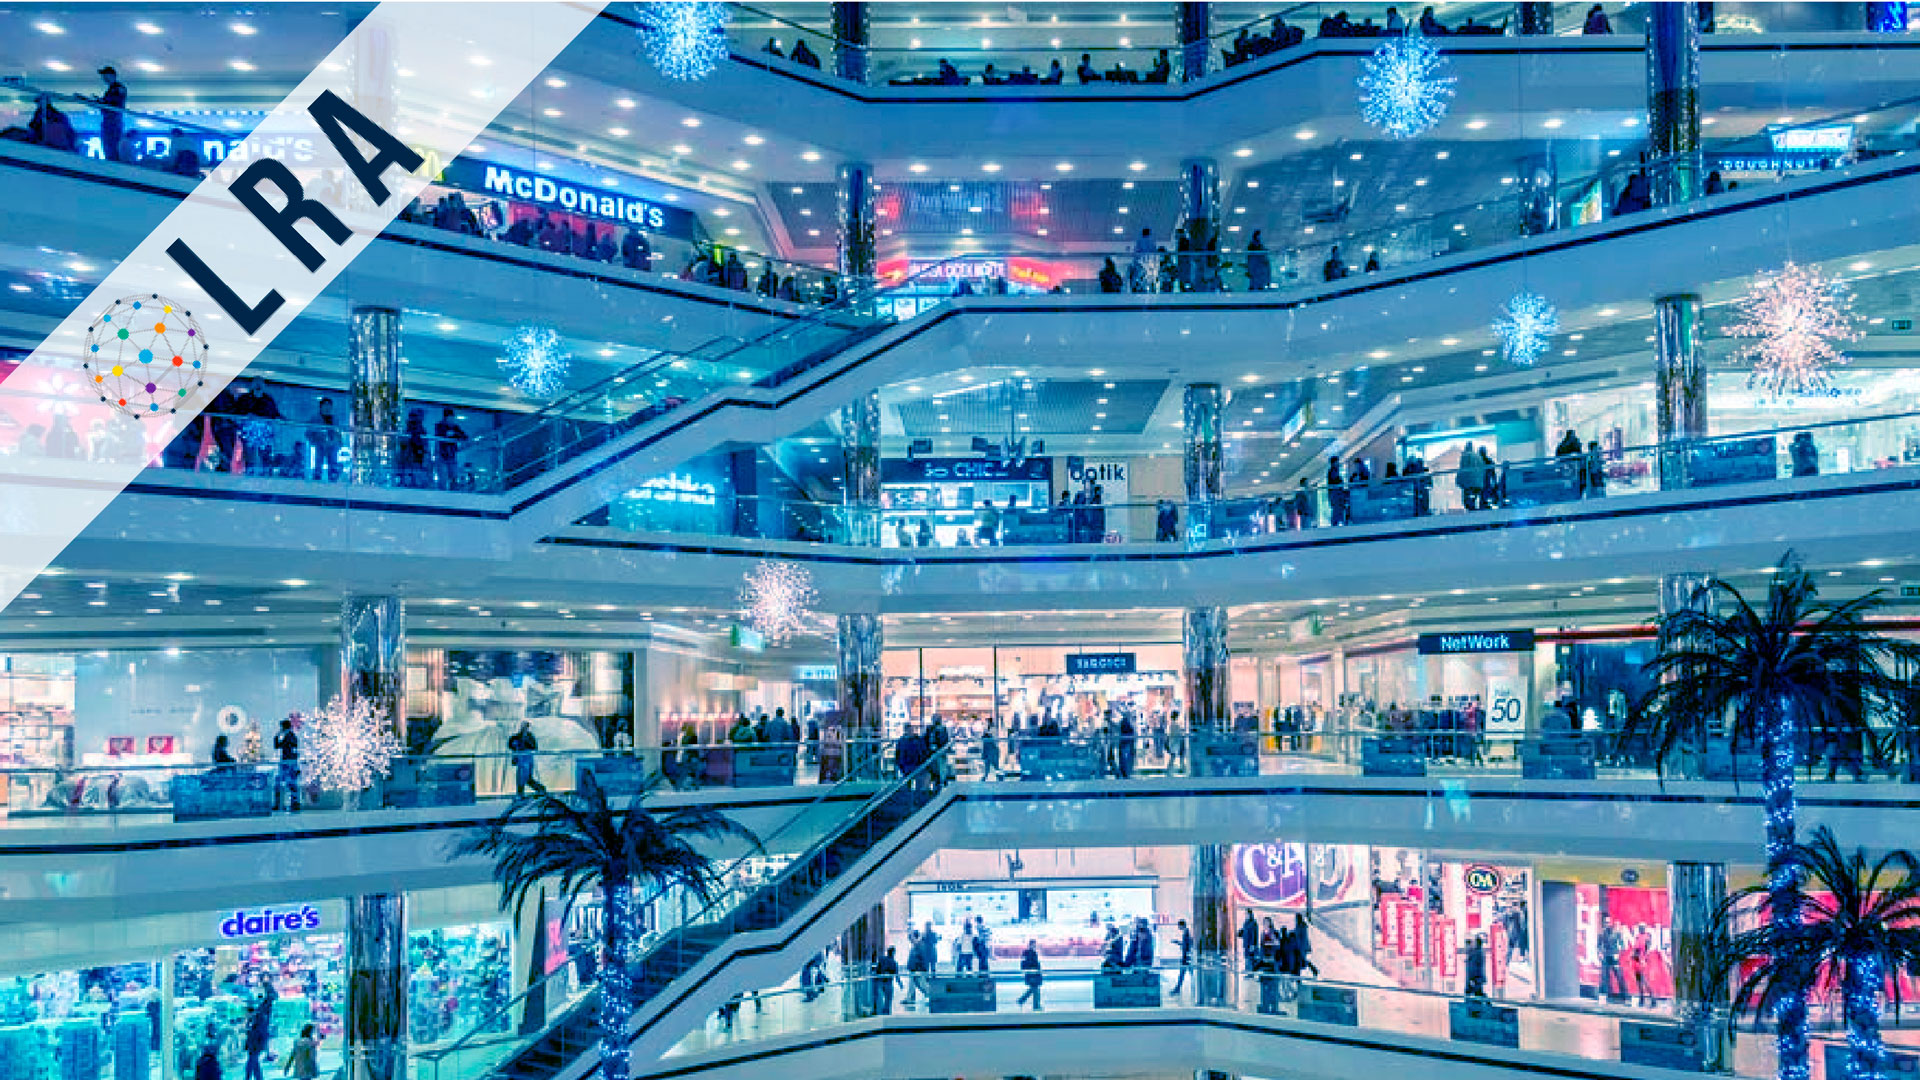 Shopping malls facing change. What’s next now?